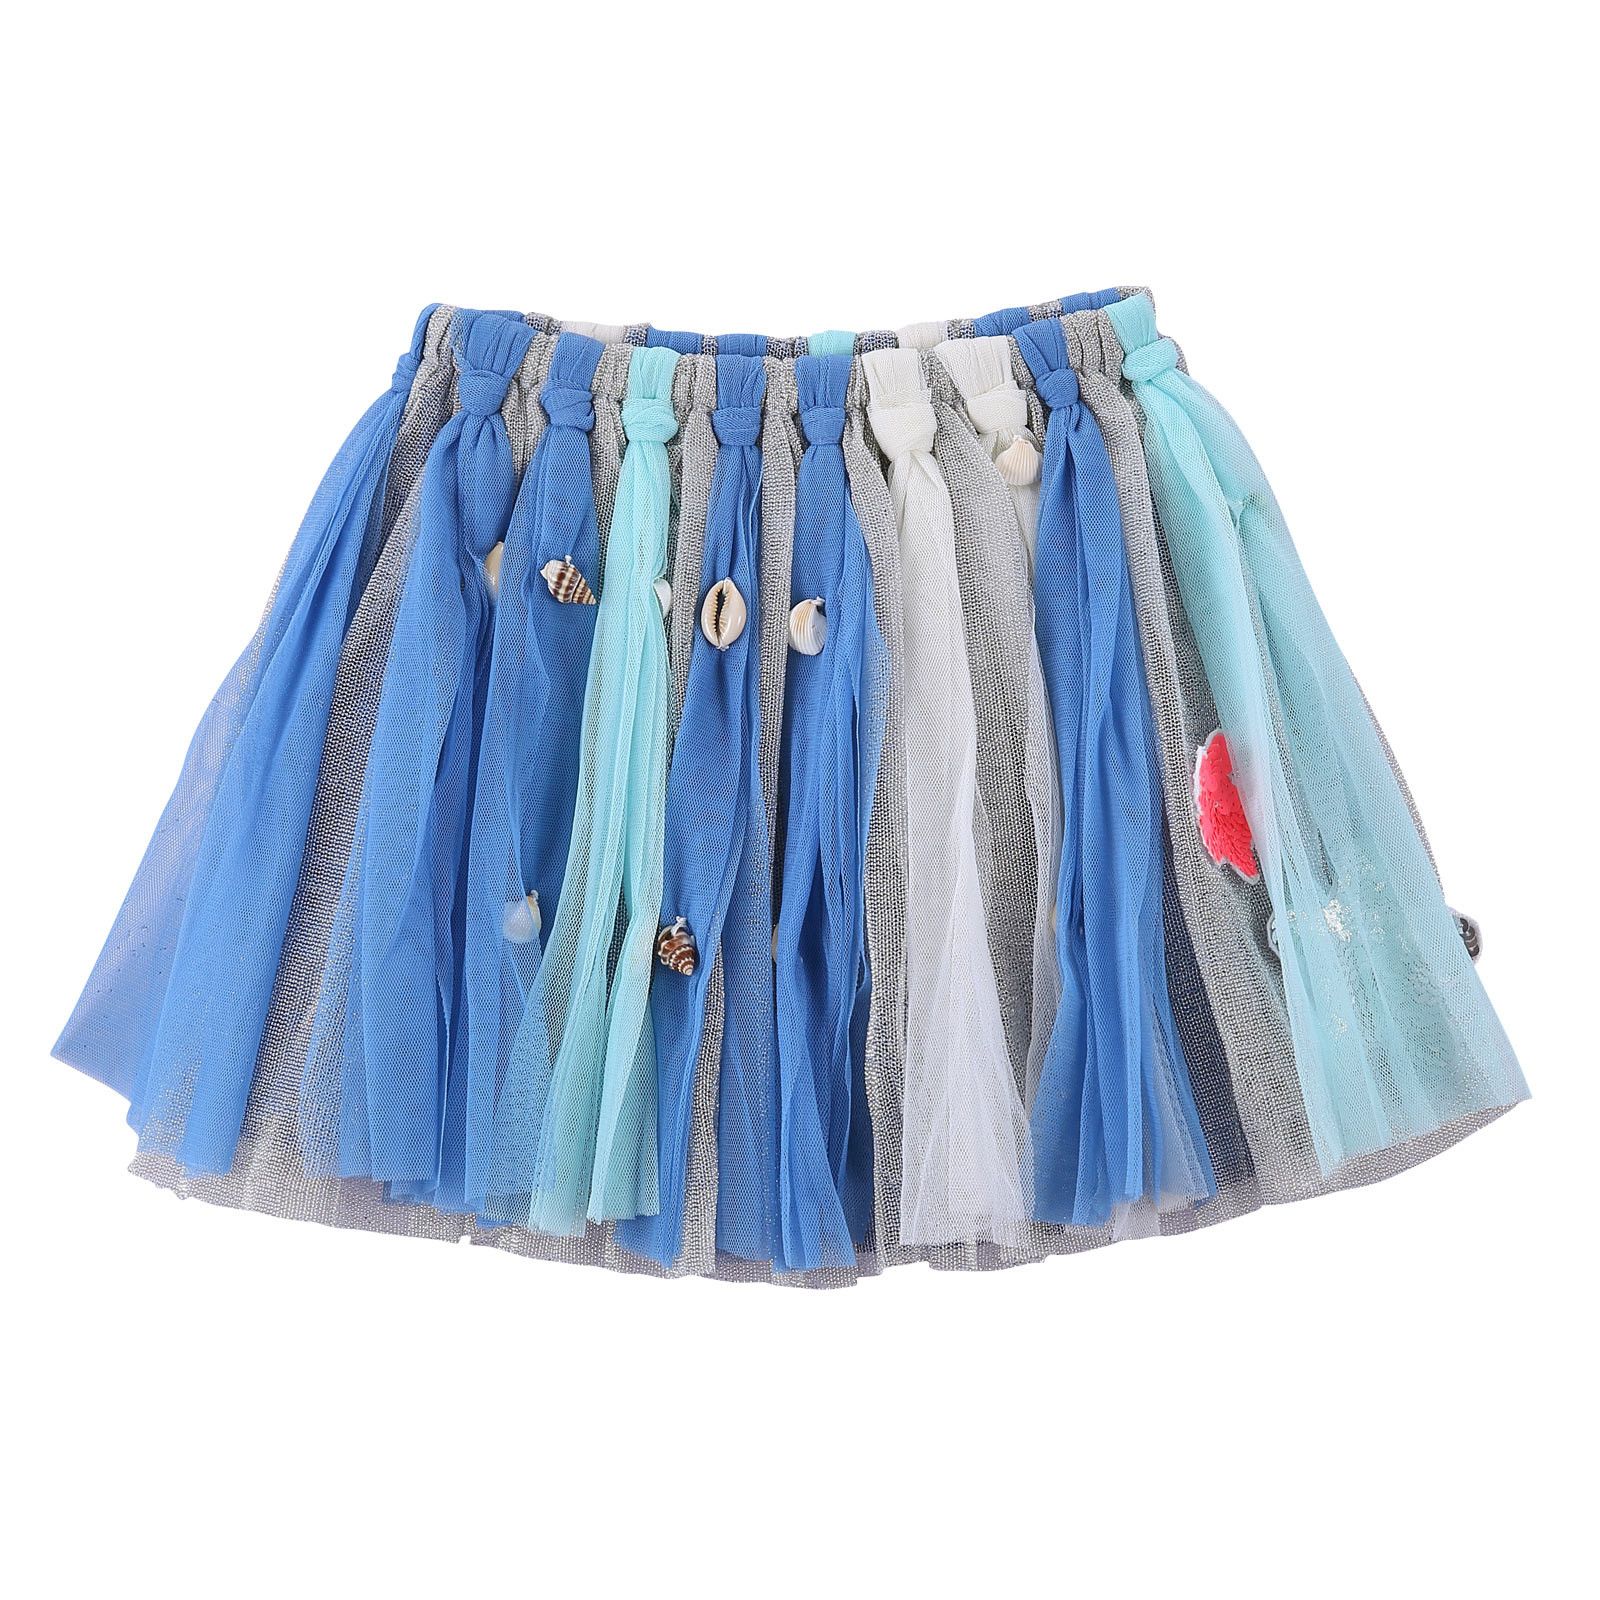 Girls Multicolor Marine Style Skirt With Patch Trims - CÉMAROSE | Children's Fashion Store - 1